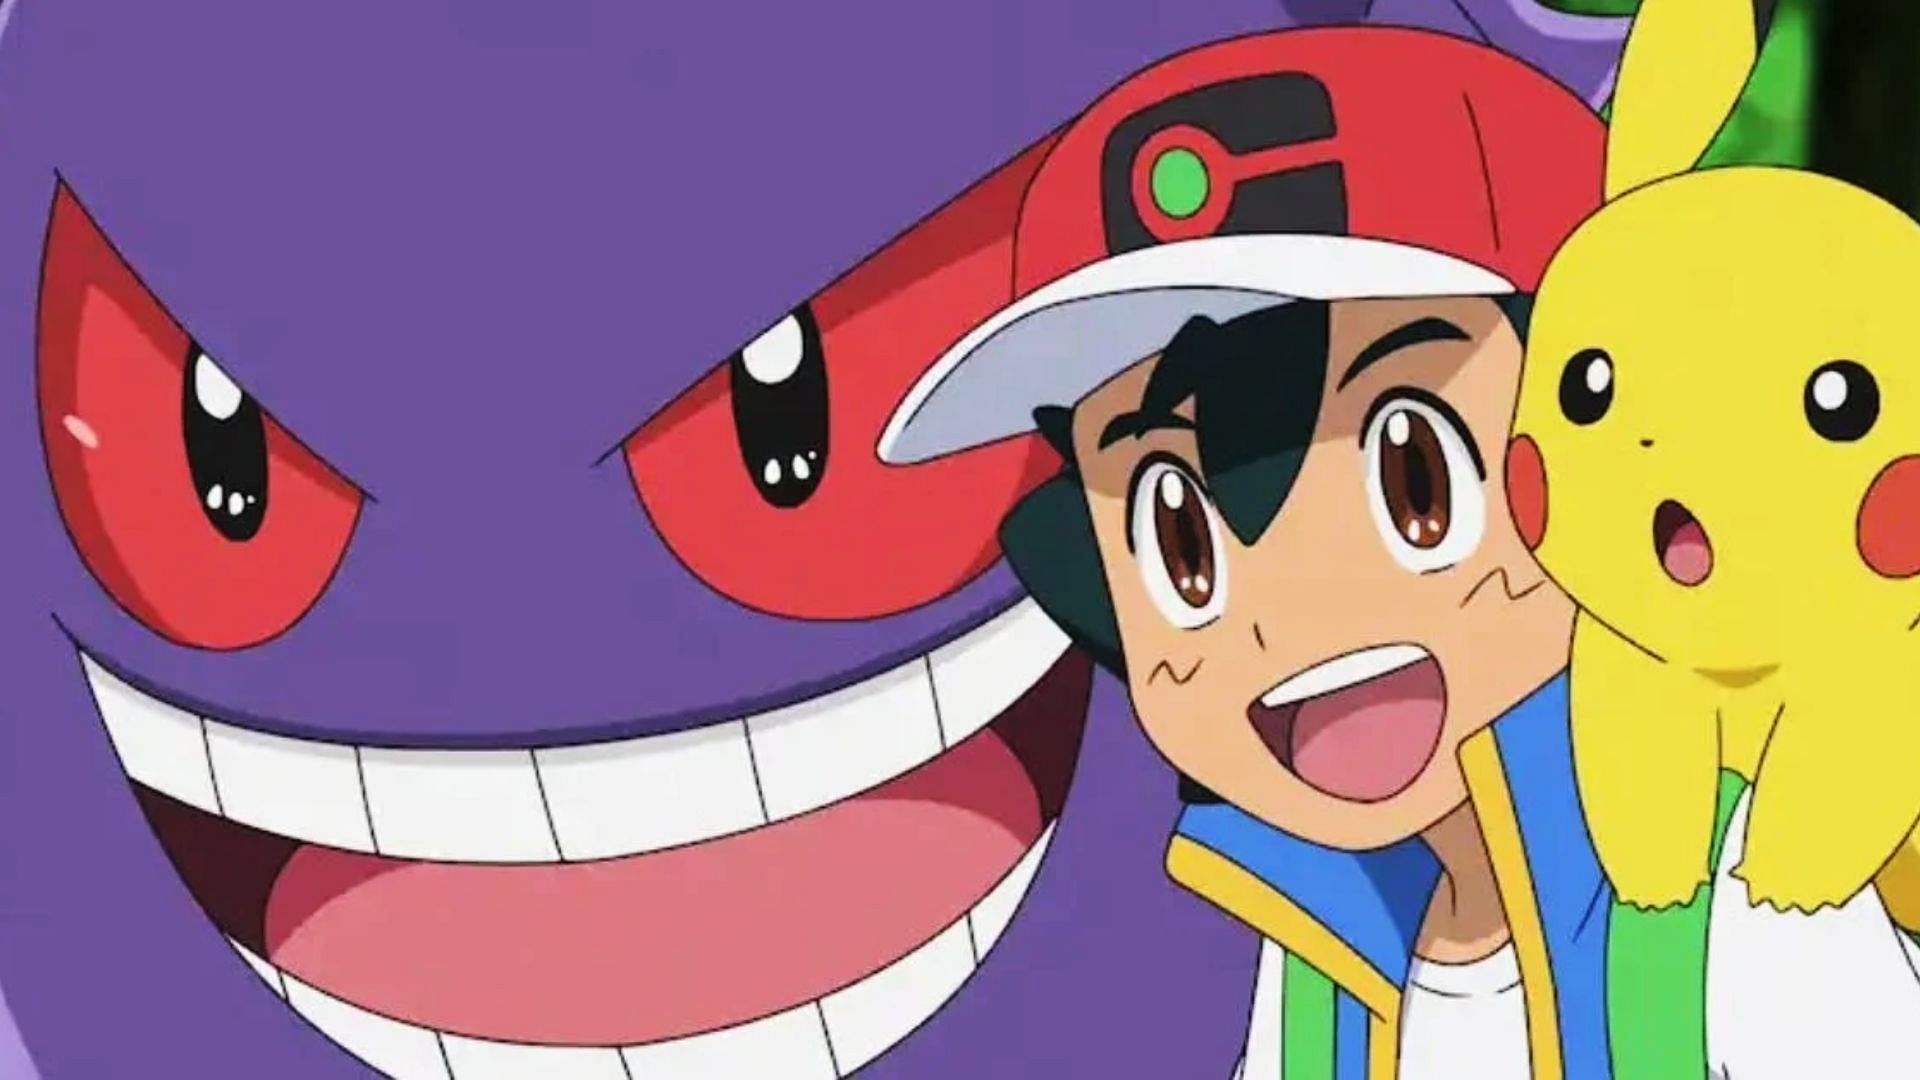 A battle between Ash and his father”: Pokemon fan wonders what the series'  finale will be